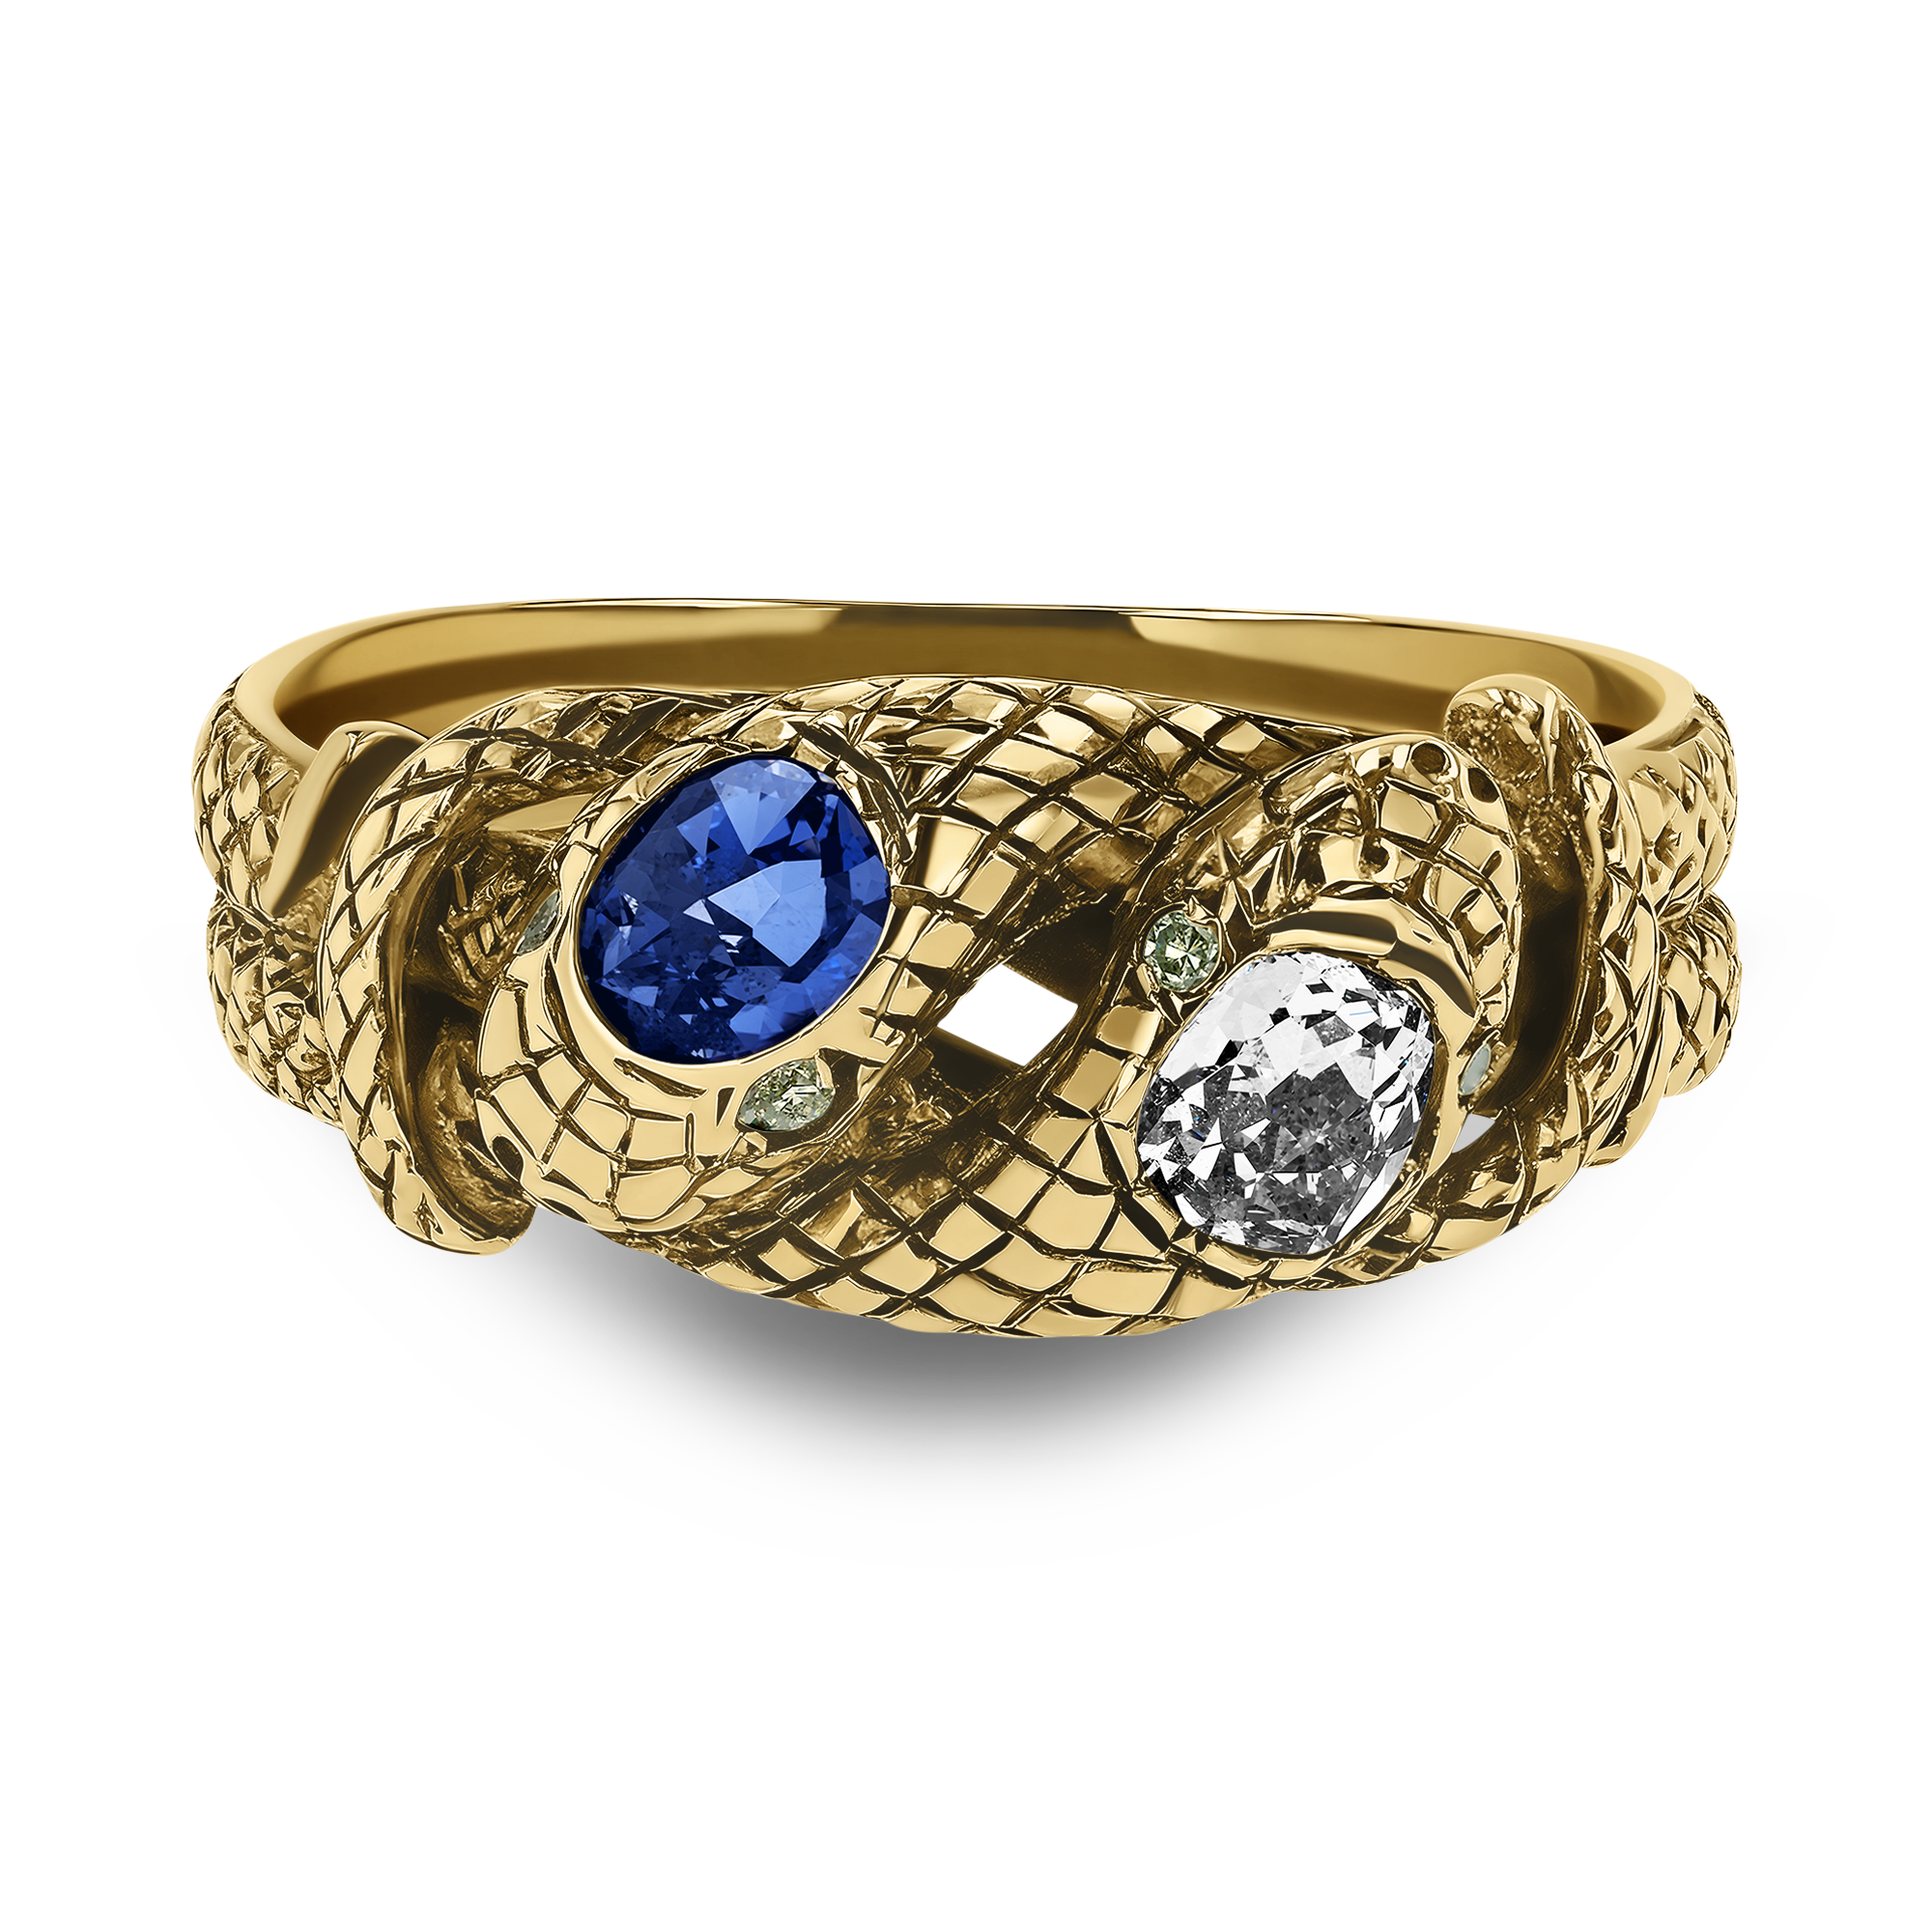 Belle Epoque Sapphire and Diamond Entwined Snake Ring Old Mine Cut, Rubover Set_2